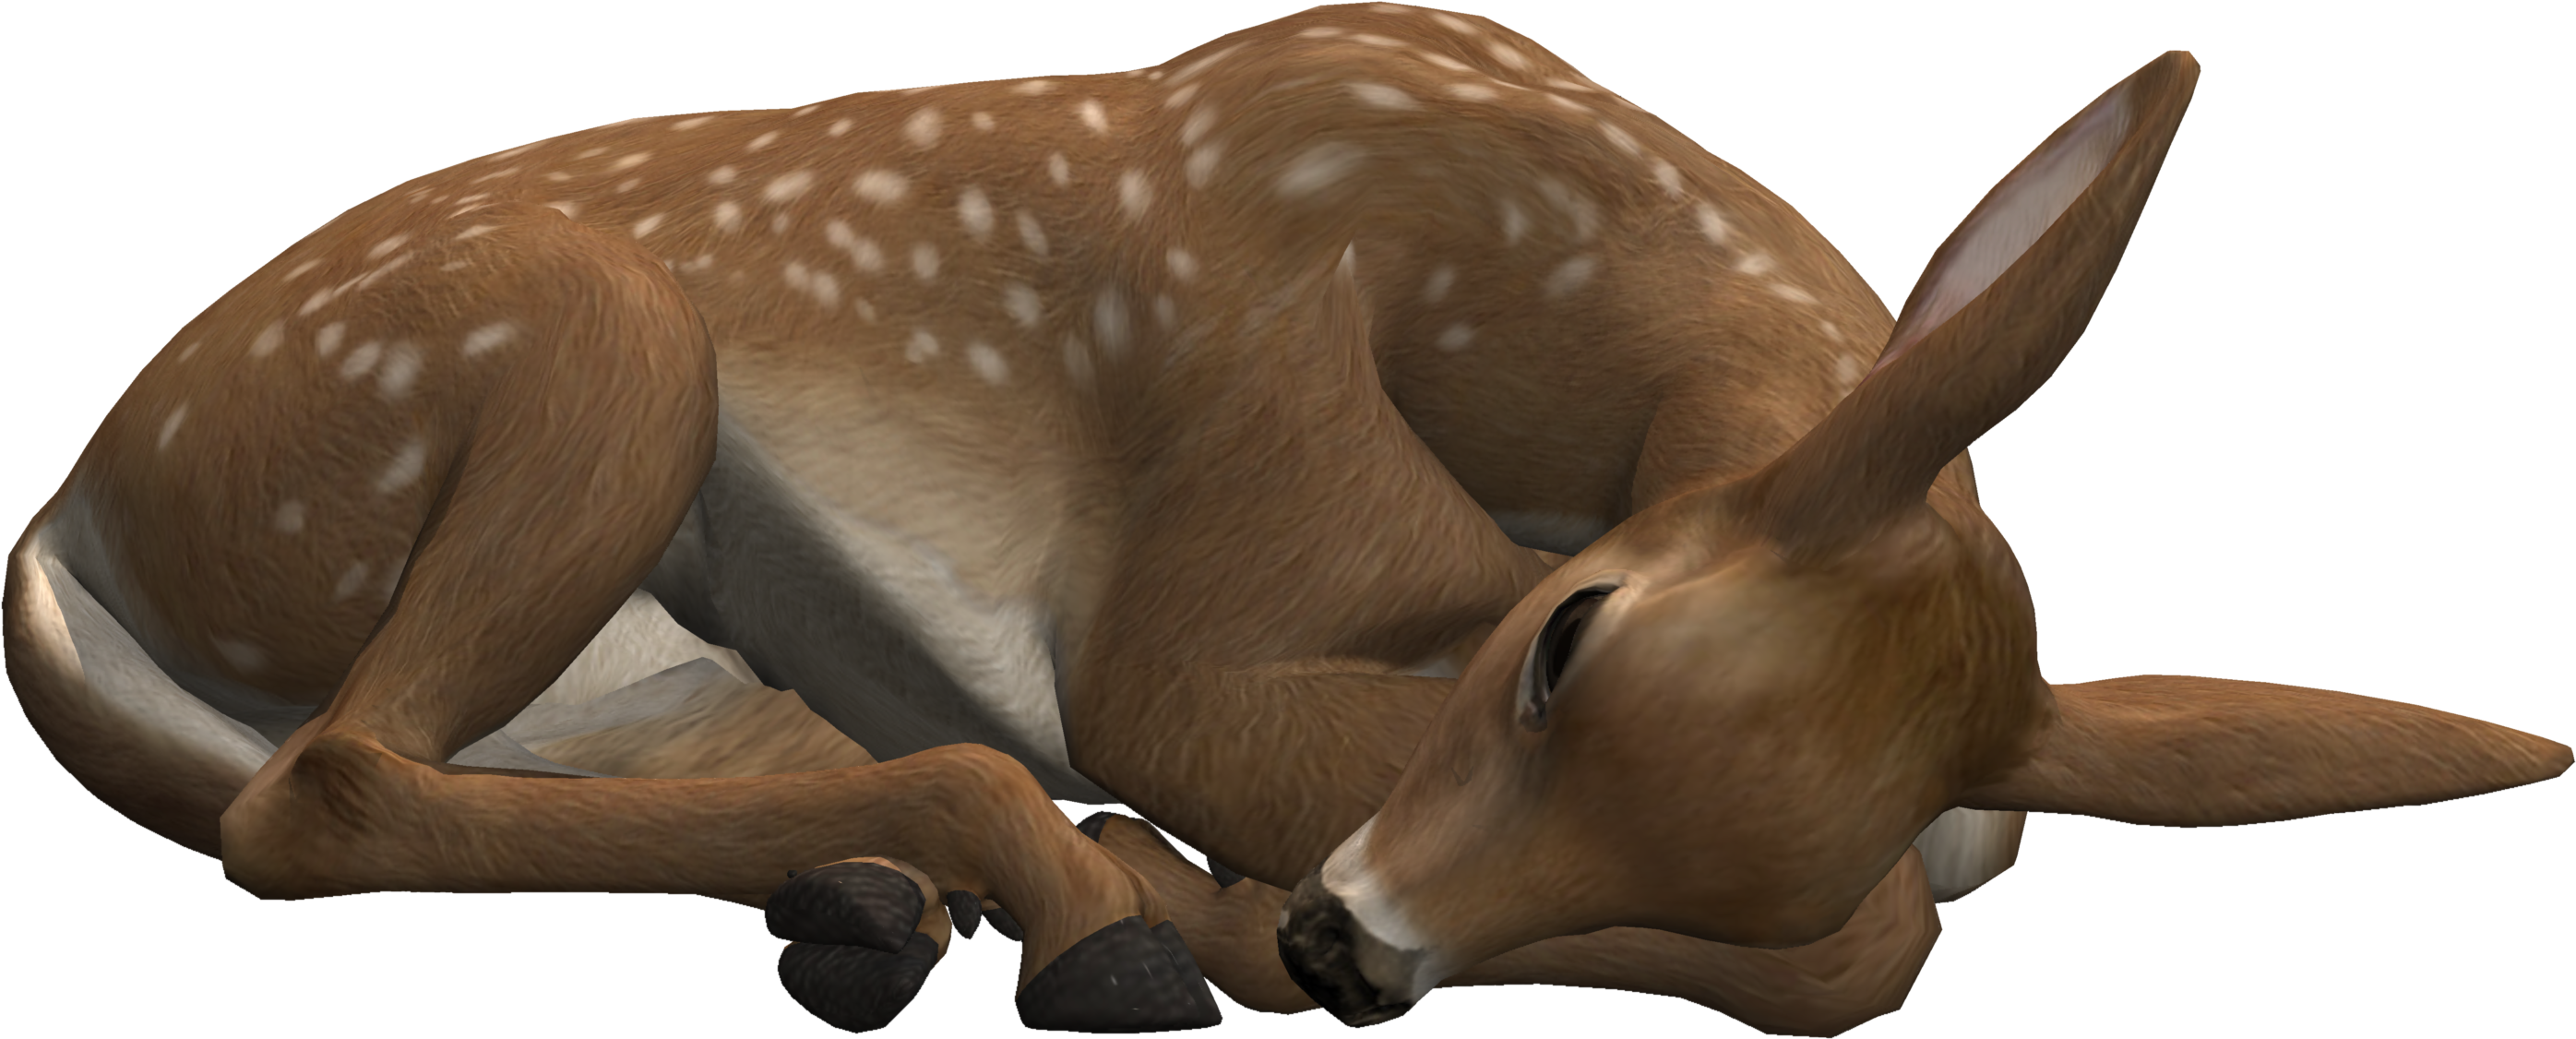 A Deer Lying Down On The Ground